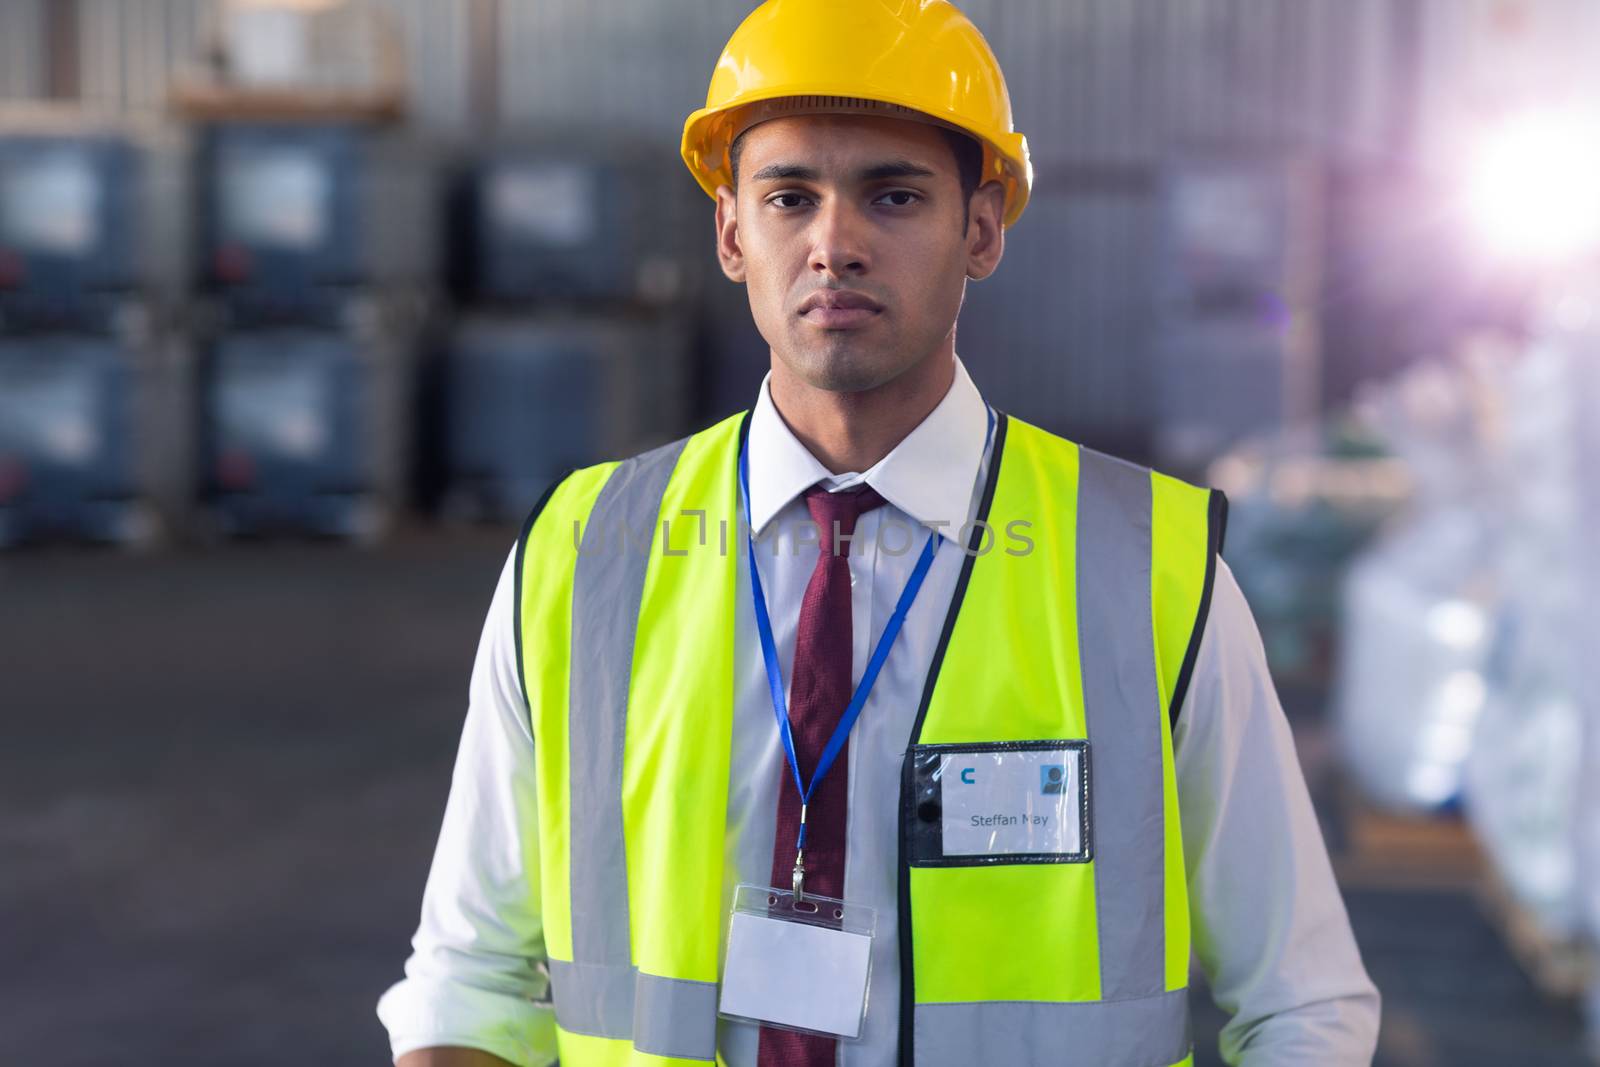 Male staff in hardhat and reflective jacket standing in warehouse by Wavebreakmedia